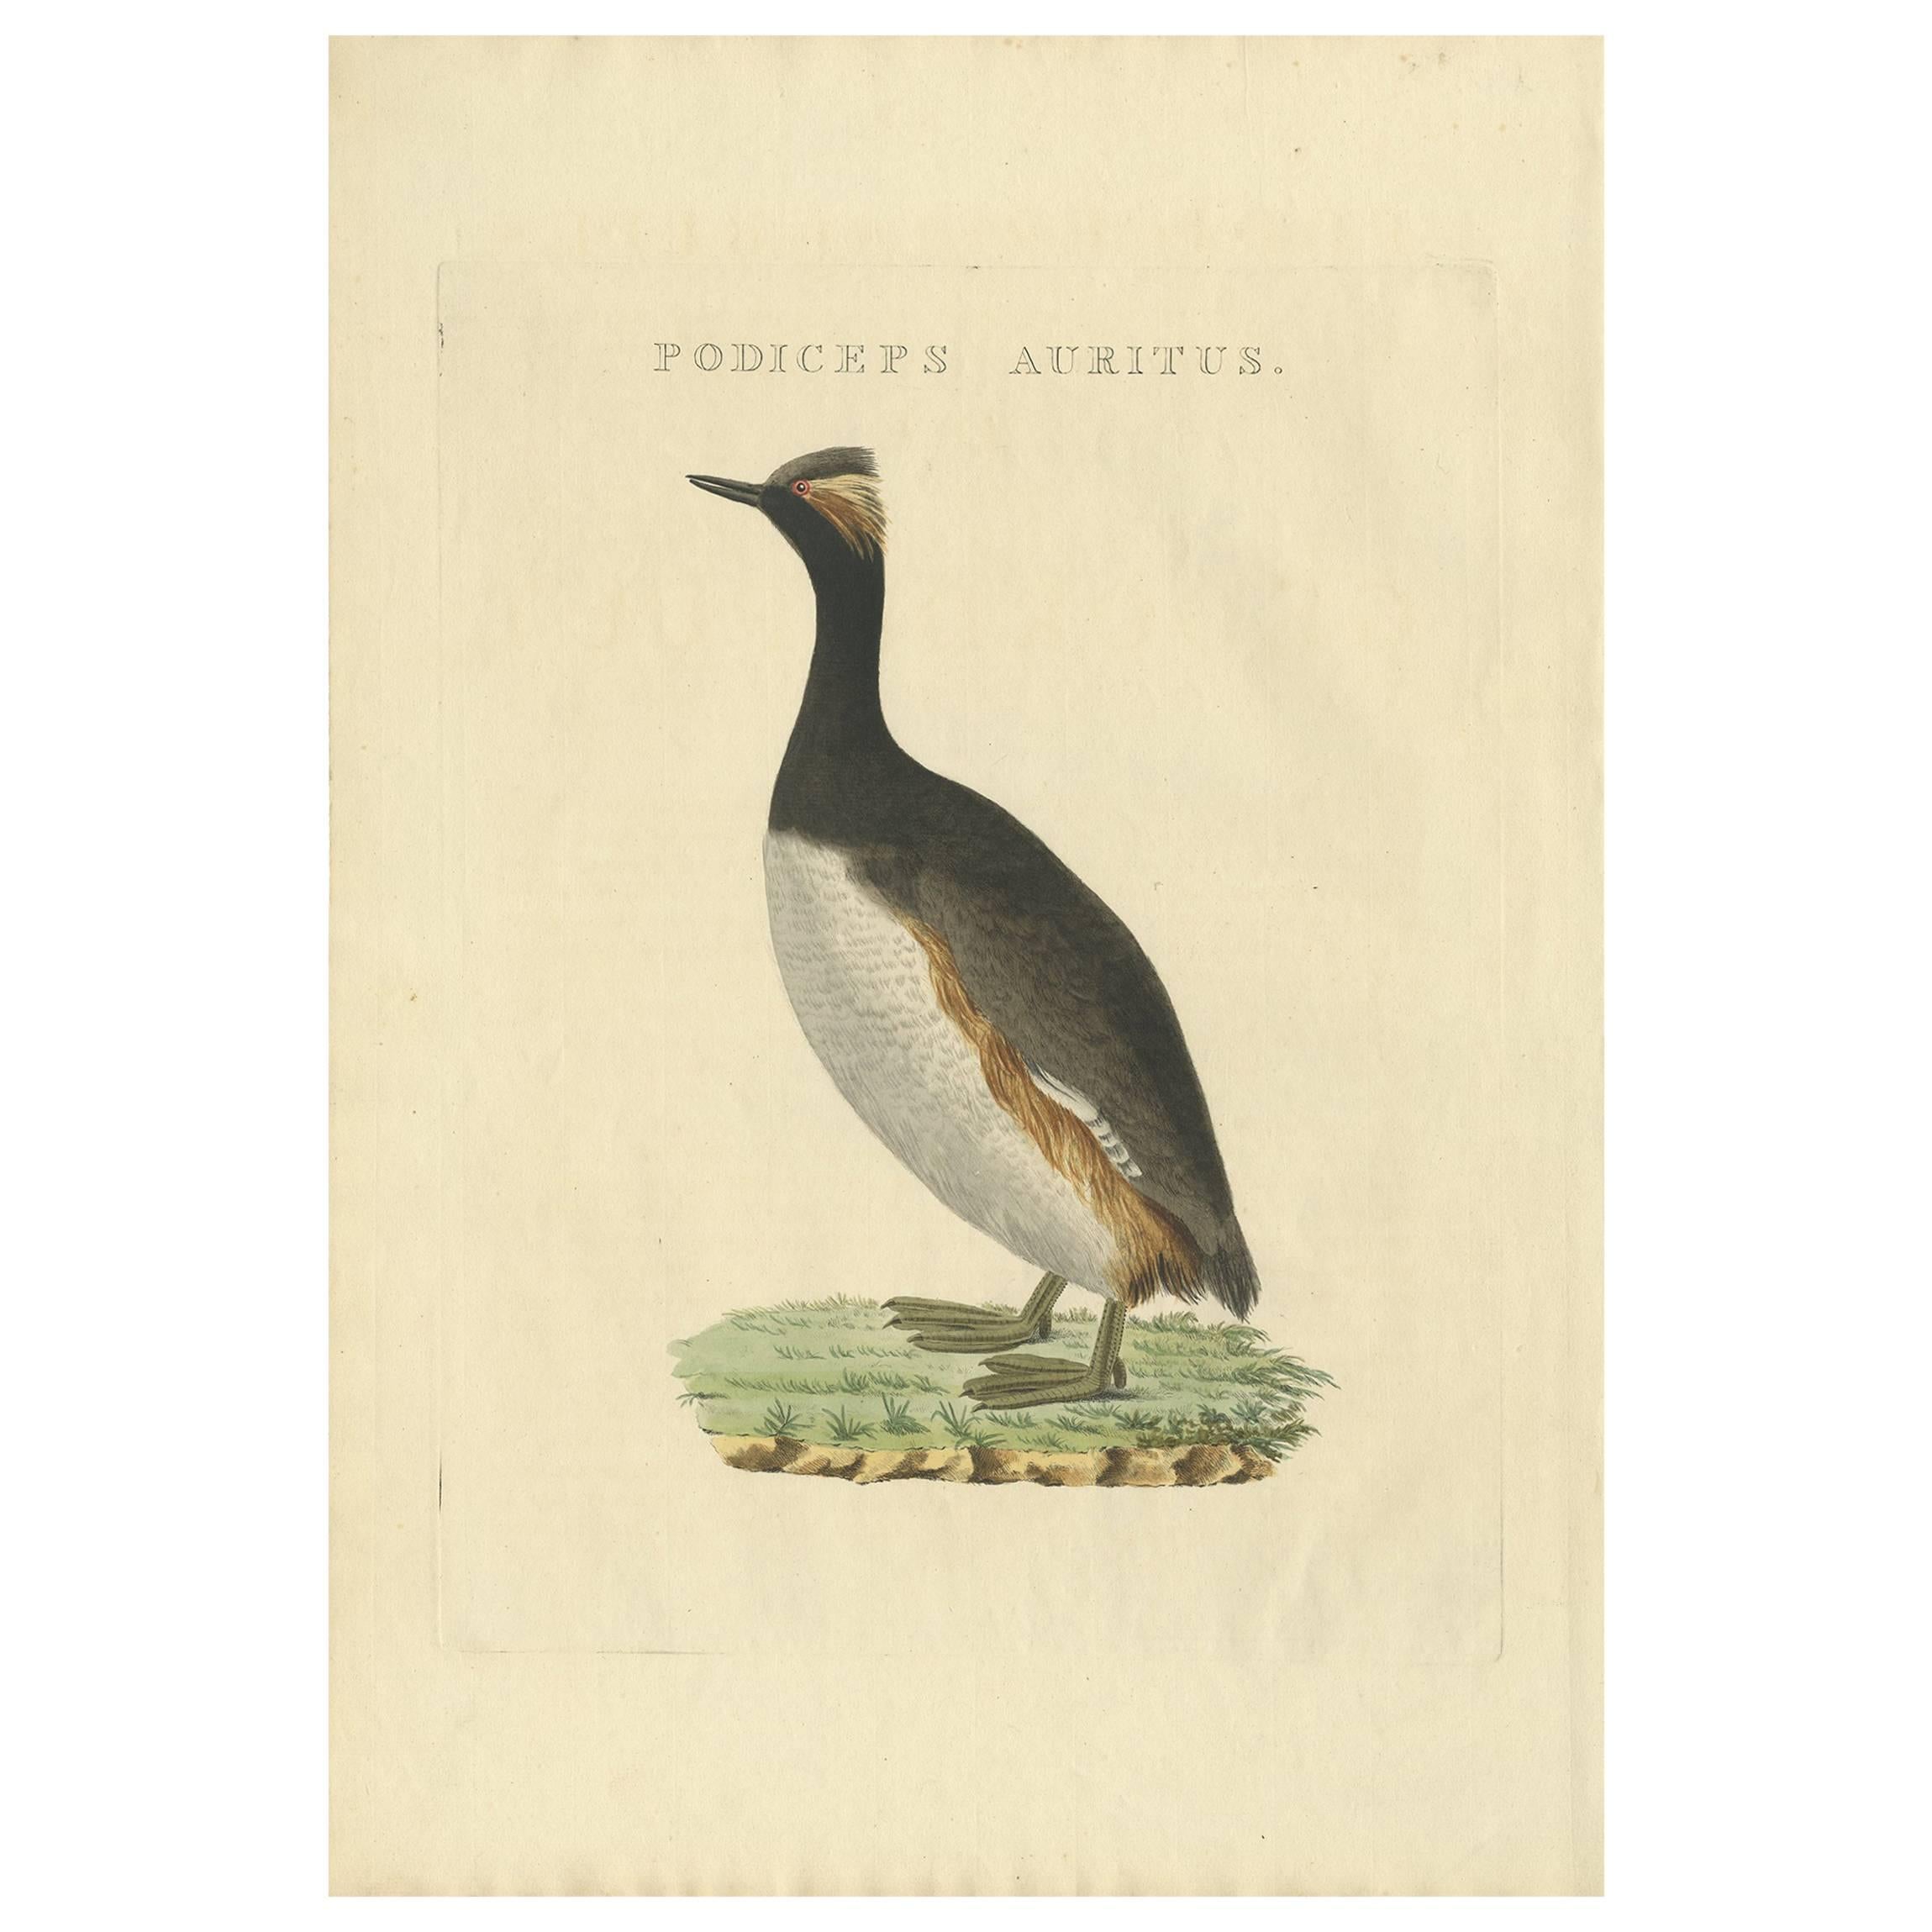 Antique Bird Print of the Horned Grebe by Sepp & Nozeman, 1829